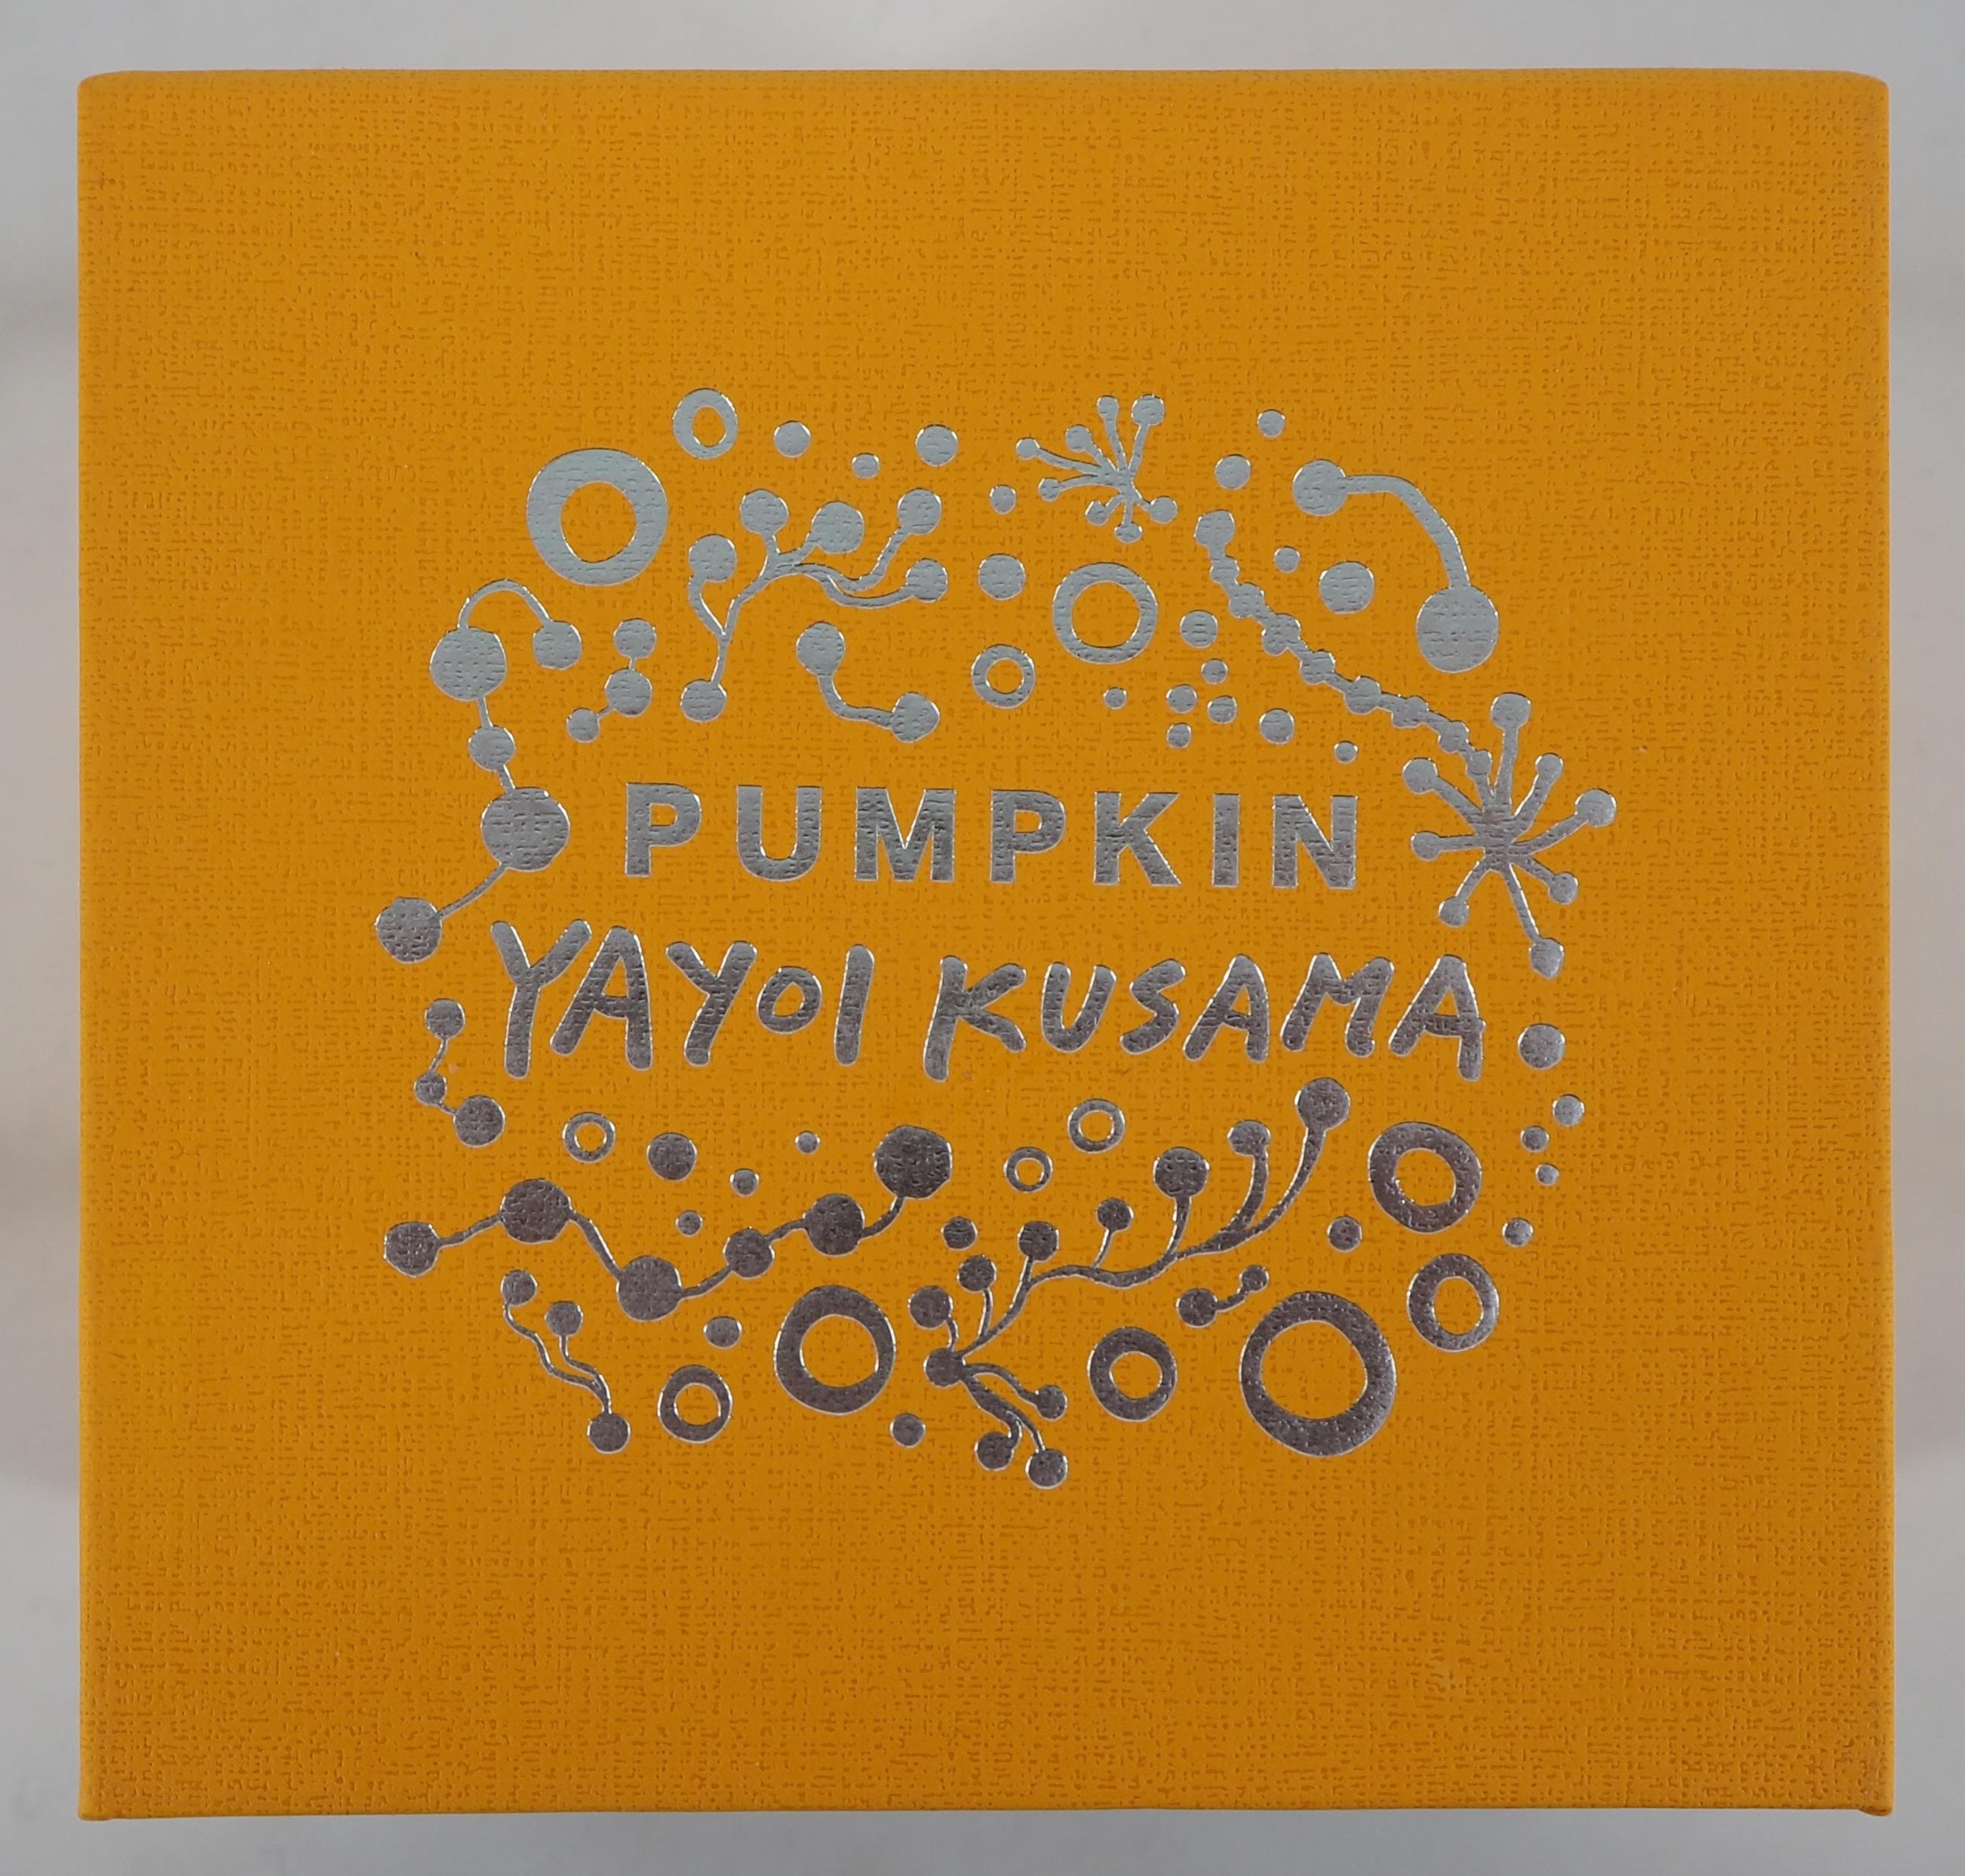 Yayoi Kusama
Pumpkin yellow (Dots Obsession)

A pumpkin sculpture made of resin
Signed under the base of the sculpture
Diameter: 8 cm
Height: 10.5 cm
Presented in the original editor case

Excellent condition